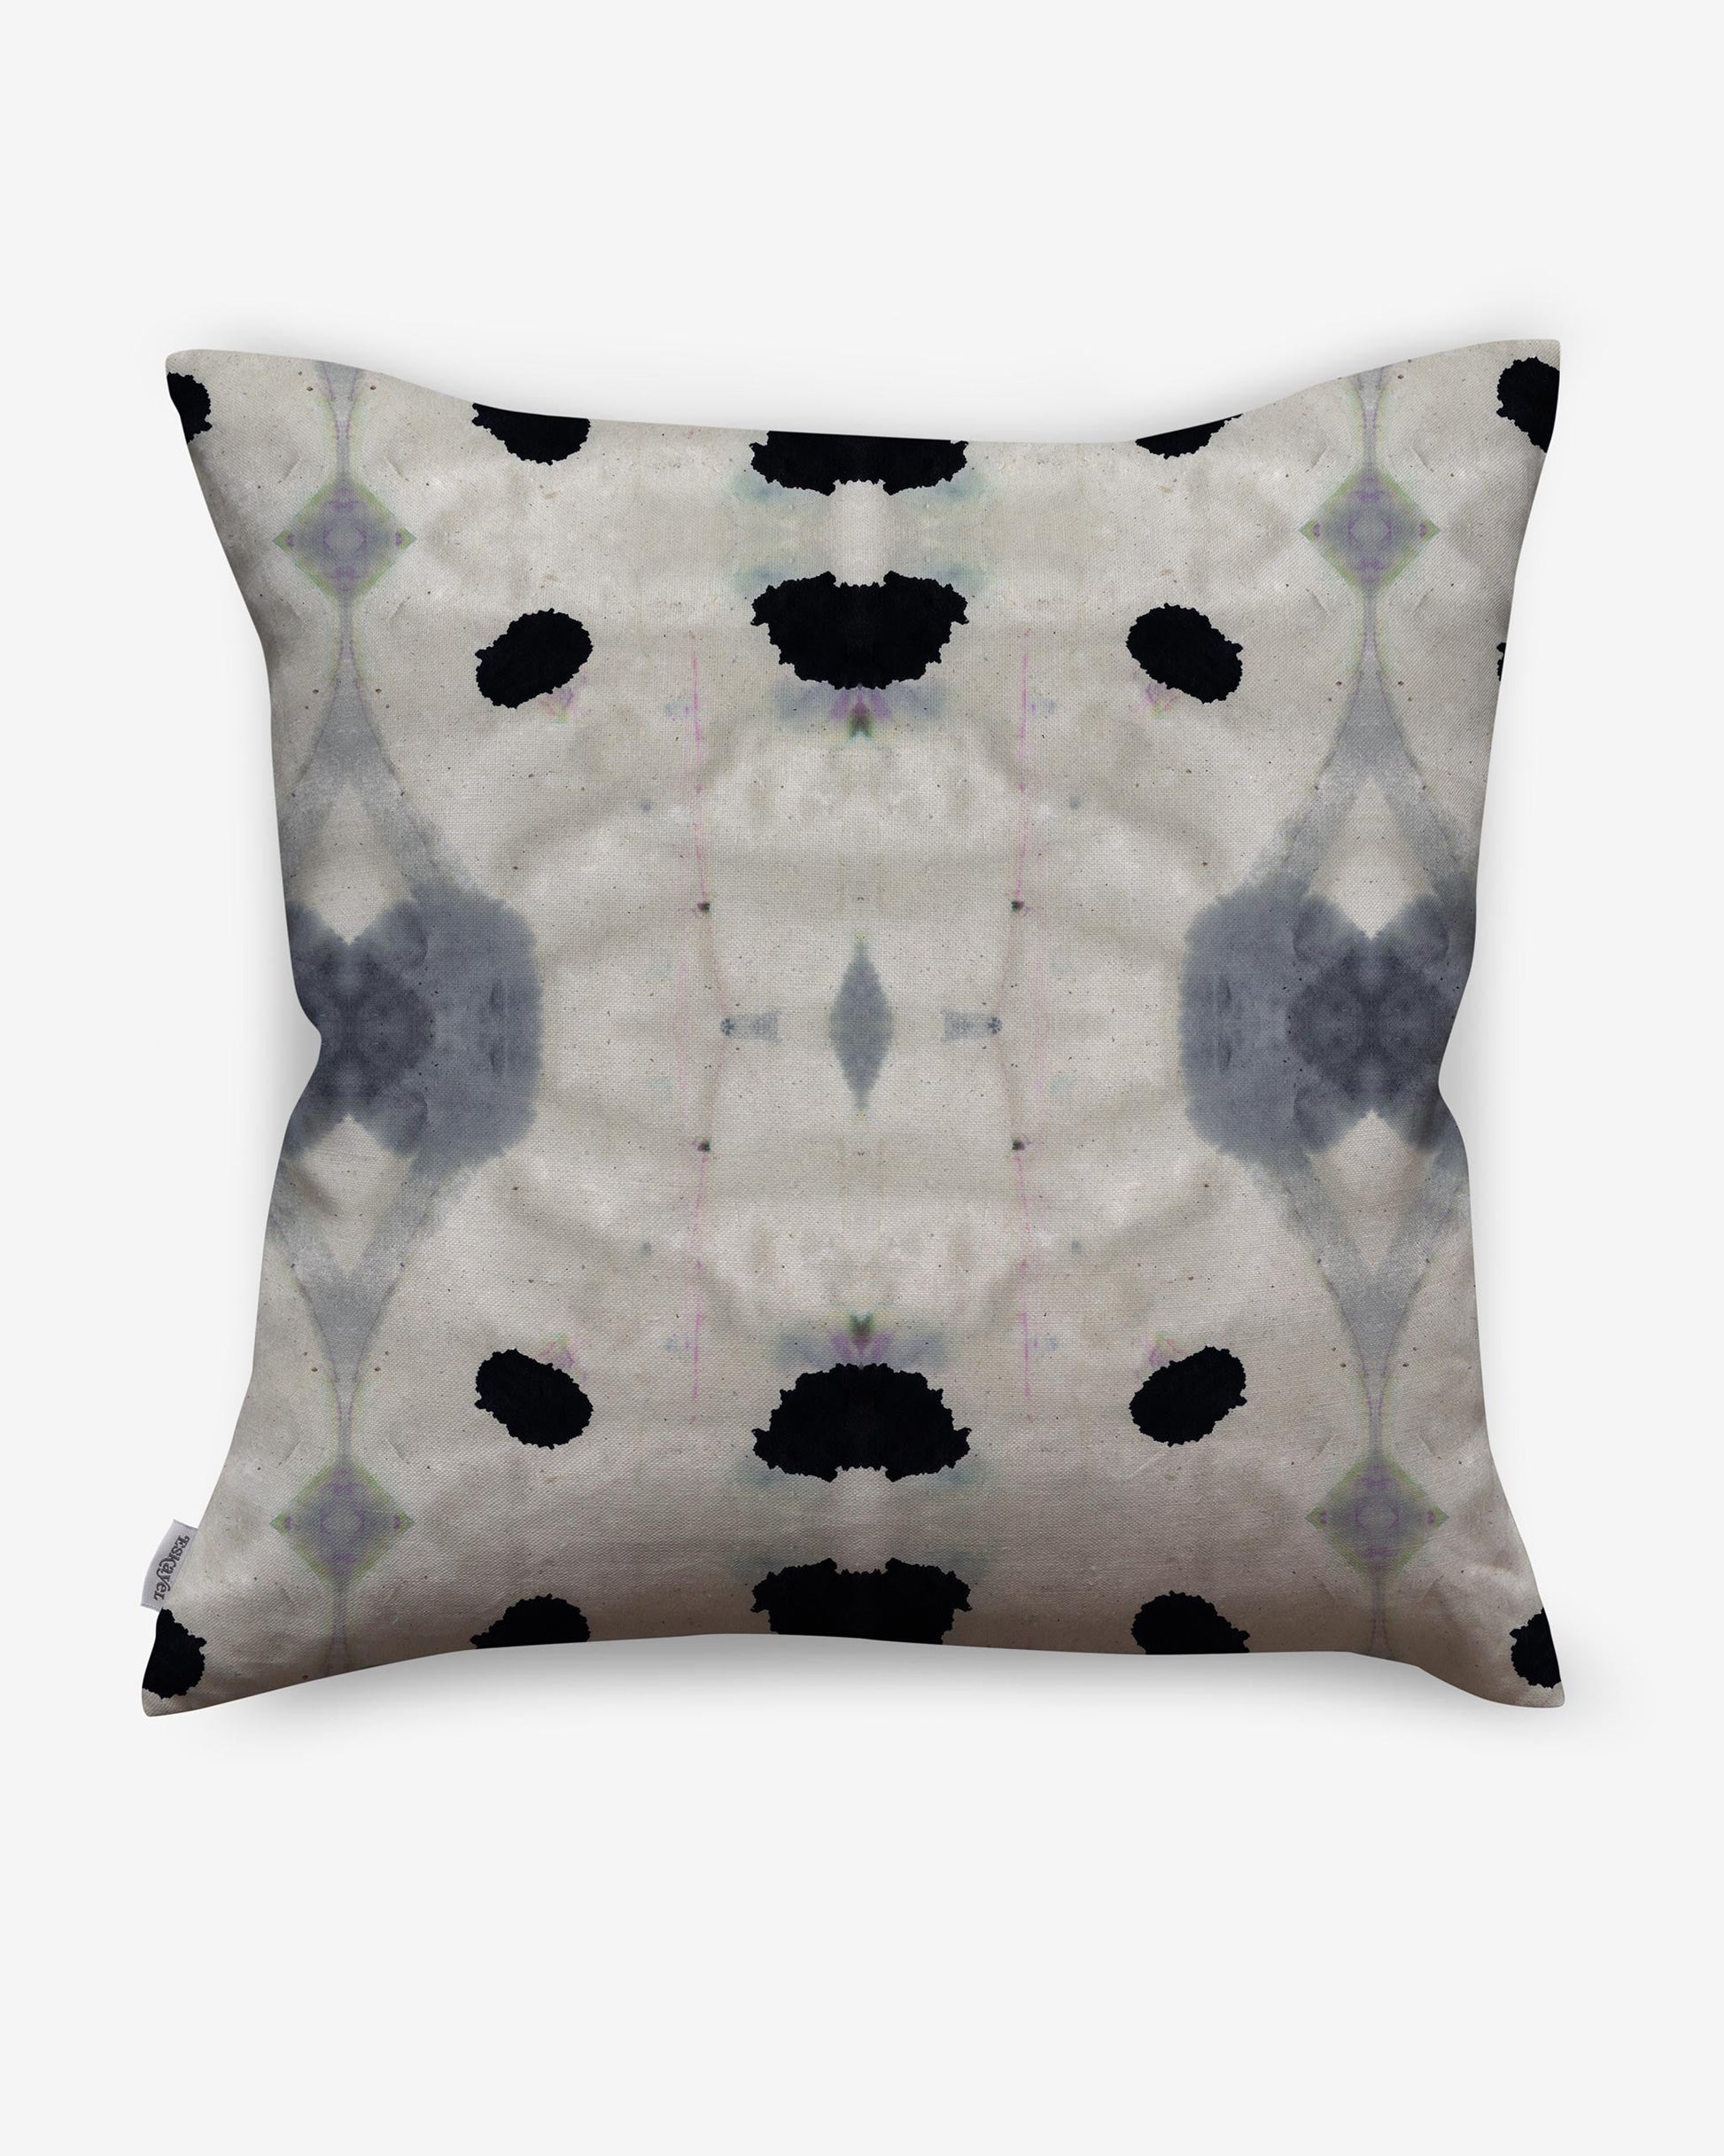 A luxury Galileo Glass Pillow Shale with symmetrical abstract patterns